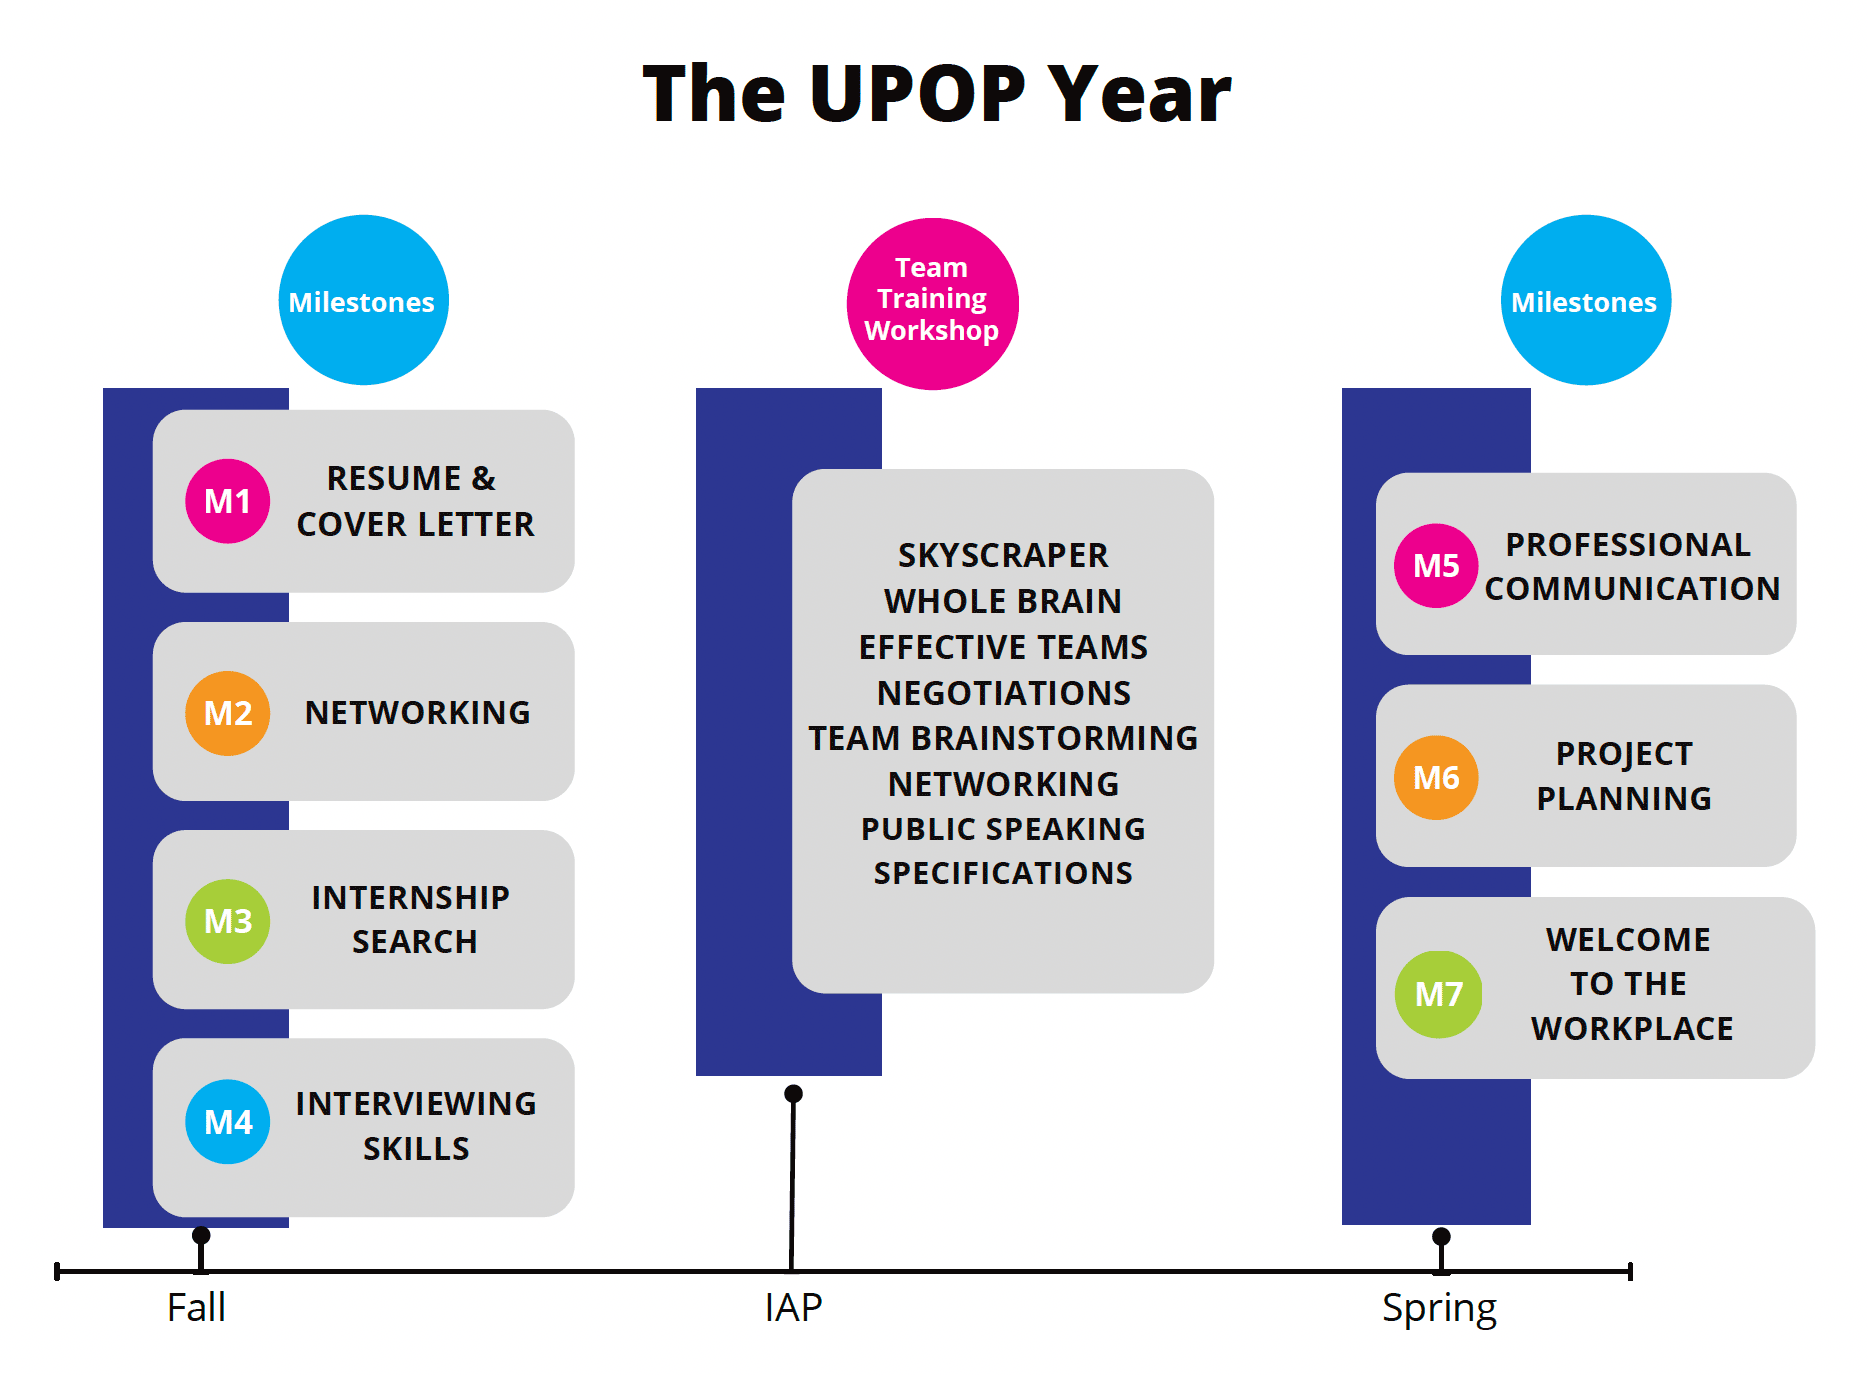 Timeline of the UPOP year